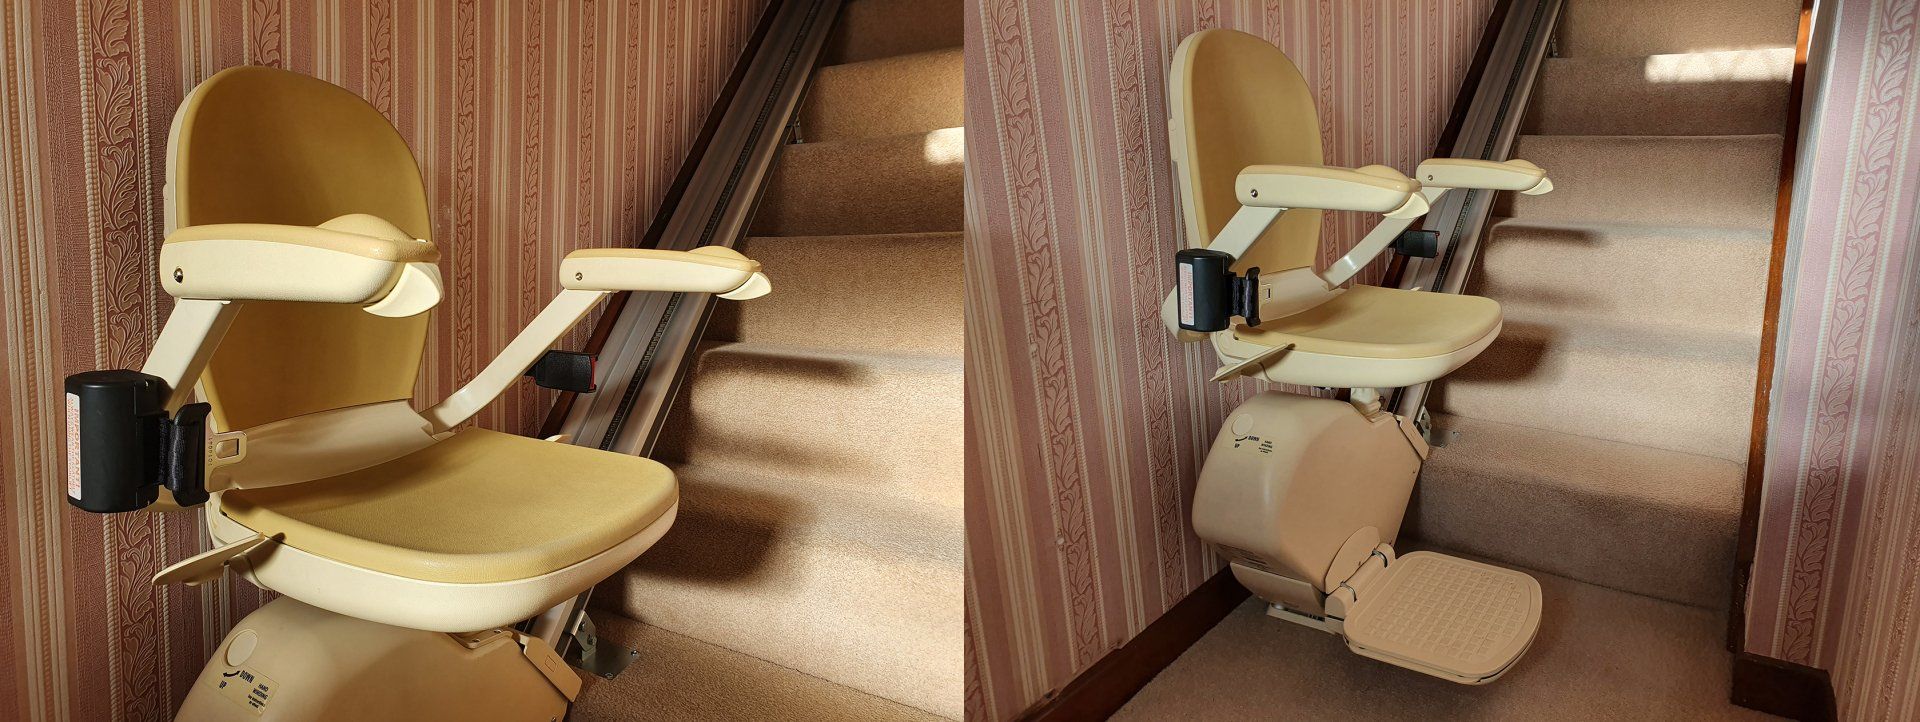 Stairlift services